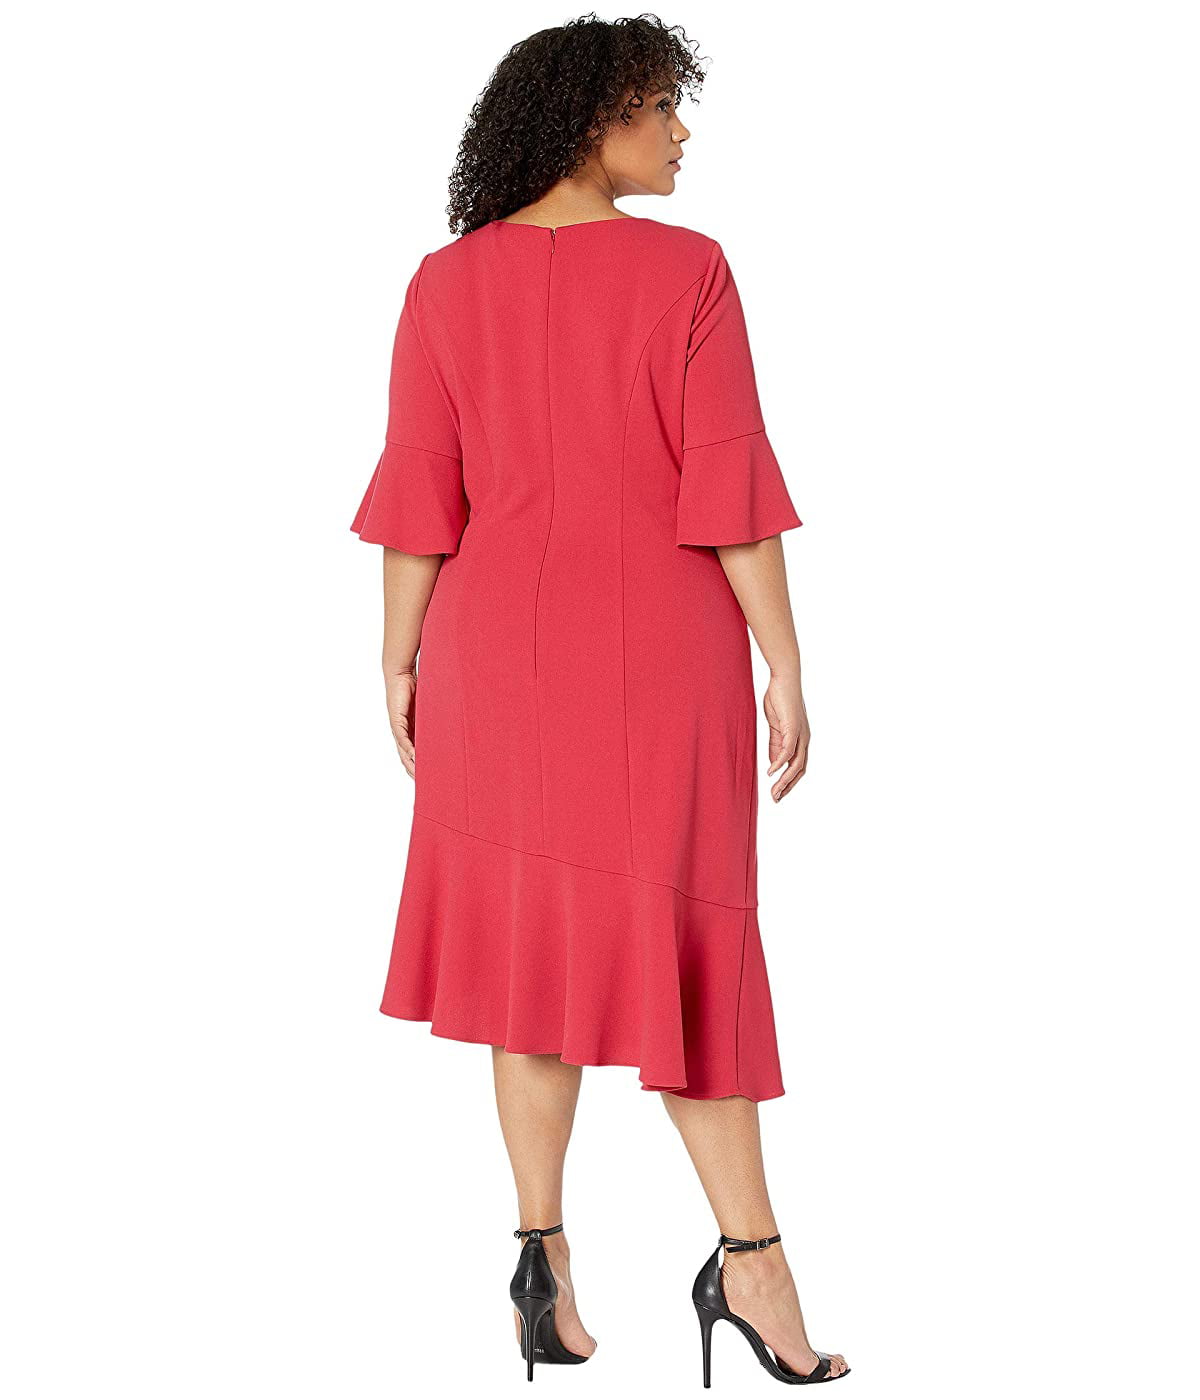 Adrianna Papell - Adrianna Papell Plus Size Knit Crepe Ruffle Midi ...